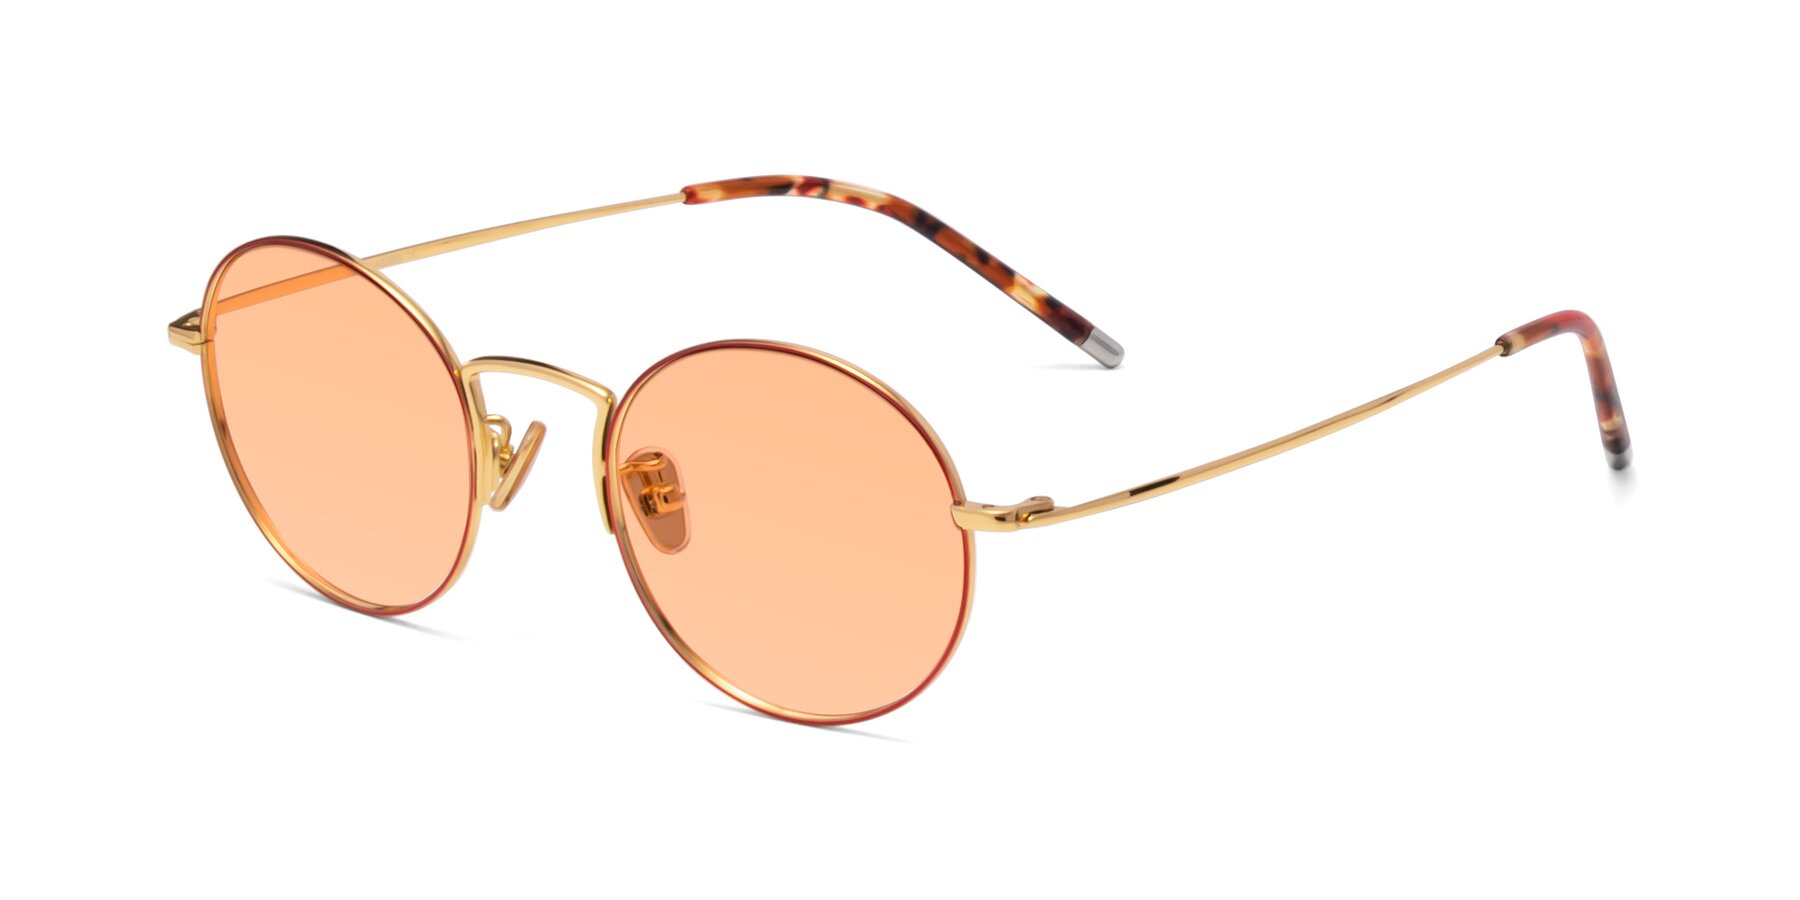 Angle of 80033 in Wine-Gold with Light Orange Tinted Lenses